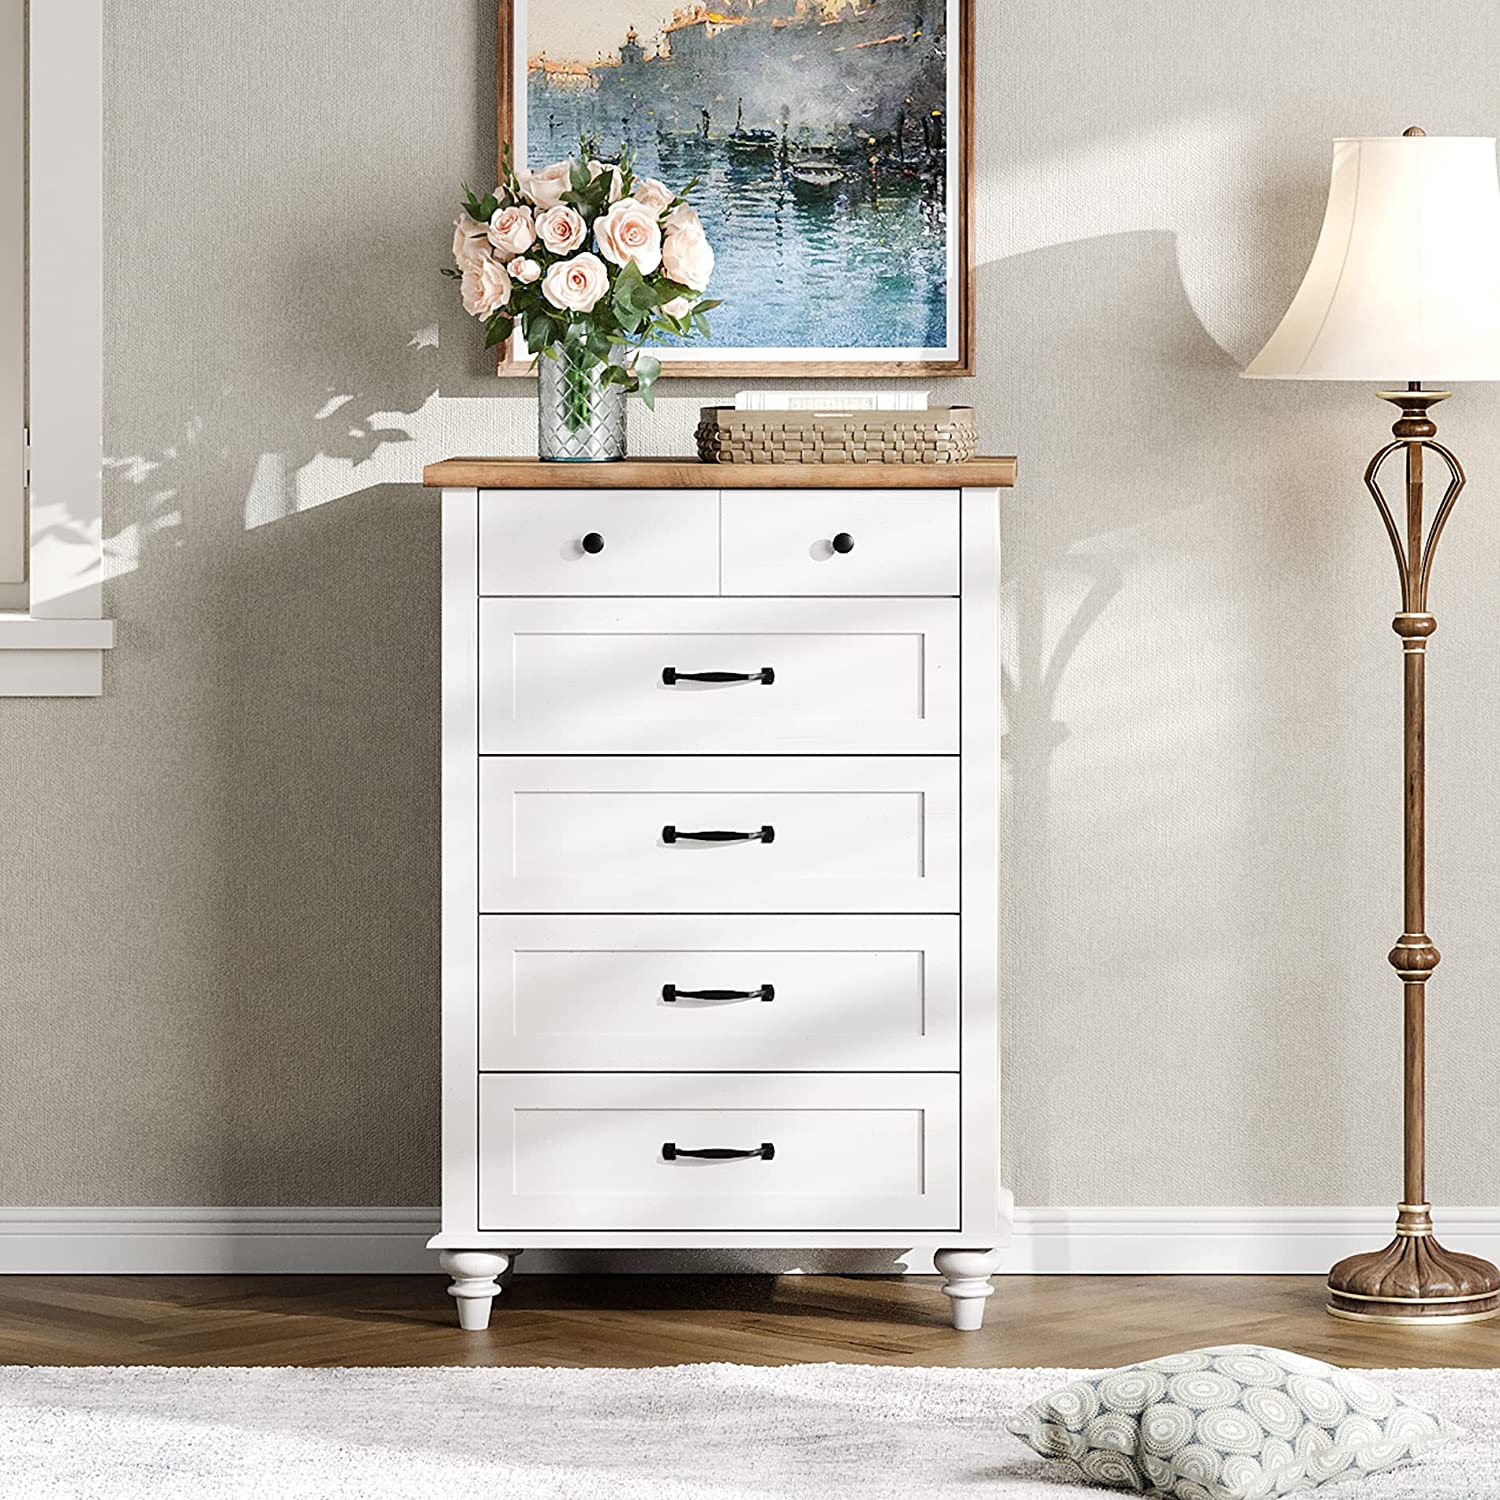 WAMPAT 27" Small Dresser for Bedroom with 5 Drawers, Tall Kids Dressers for Small Space, White